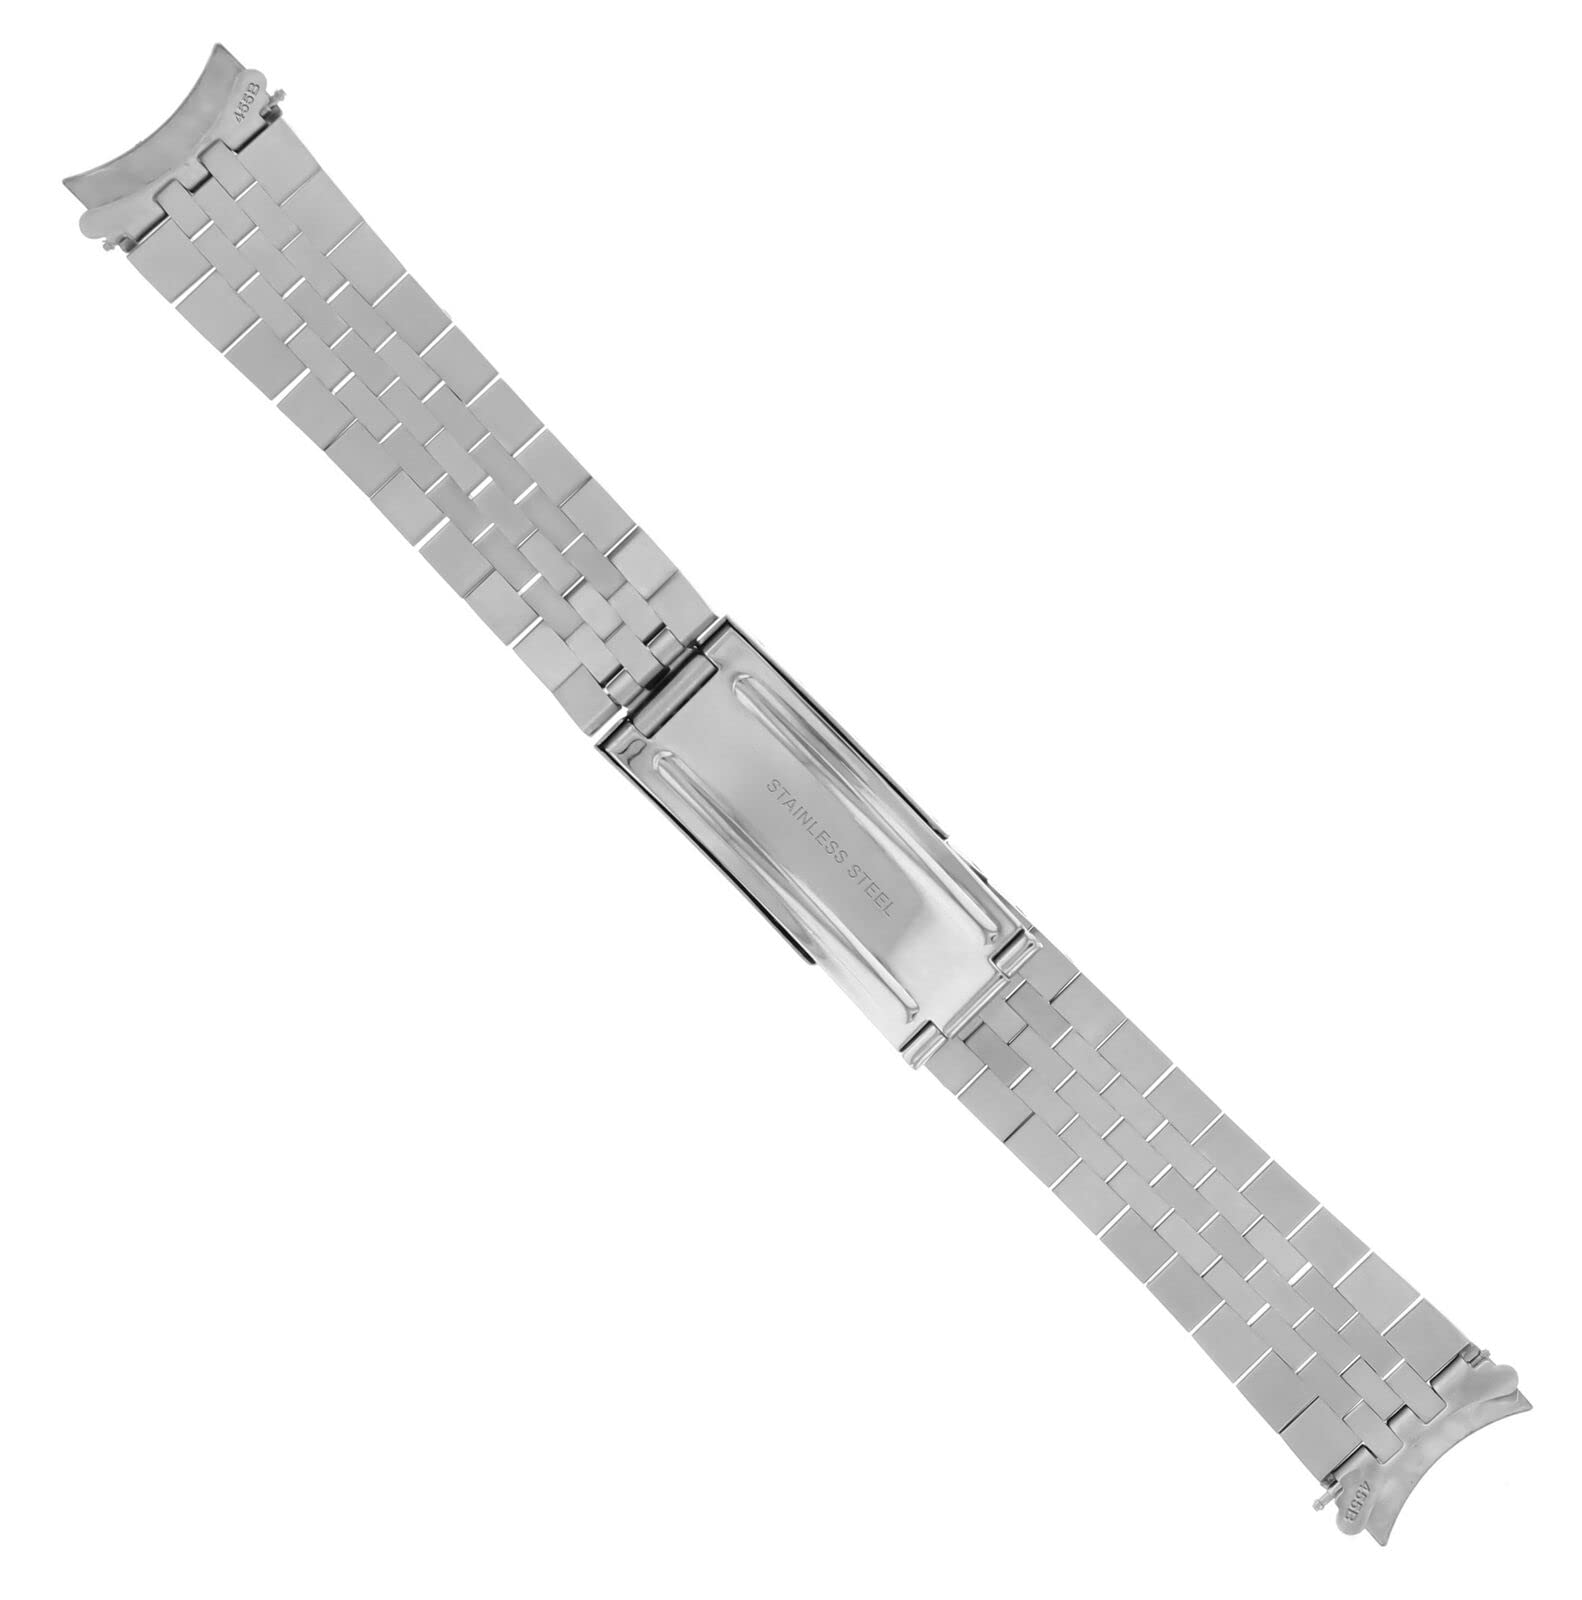 Ewatchparts 19MM JUBILEE WATCH BAND COMPATIBLE WITH 34MM ROLEX DATE 1501 1505 1500 5500 316L S/STEEL